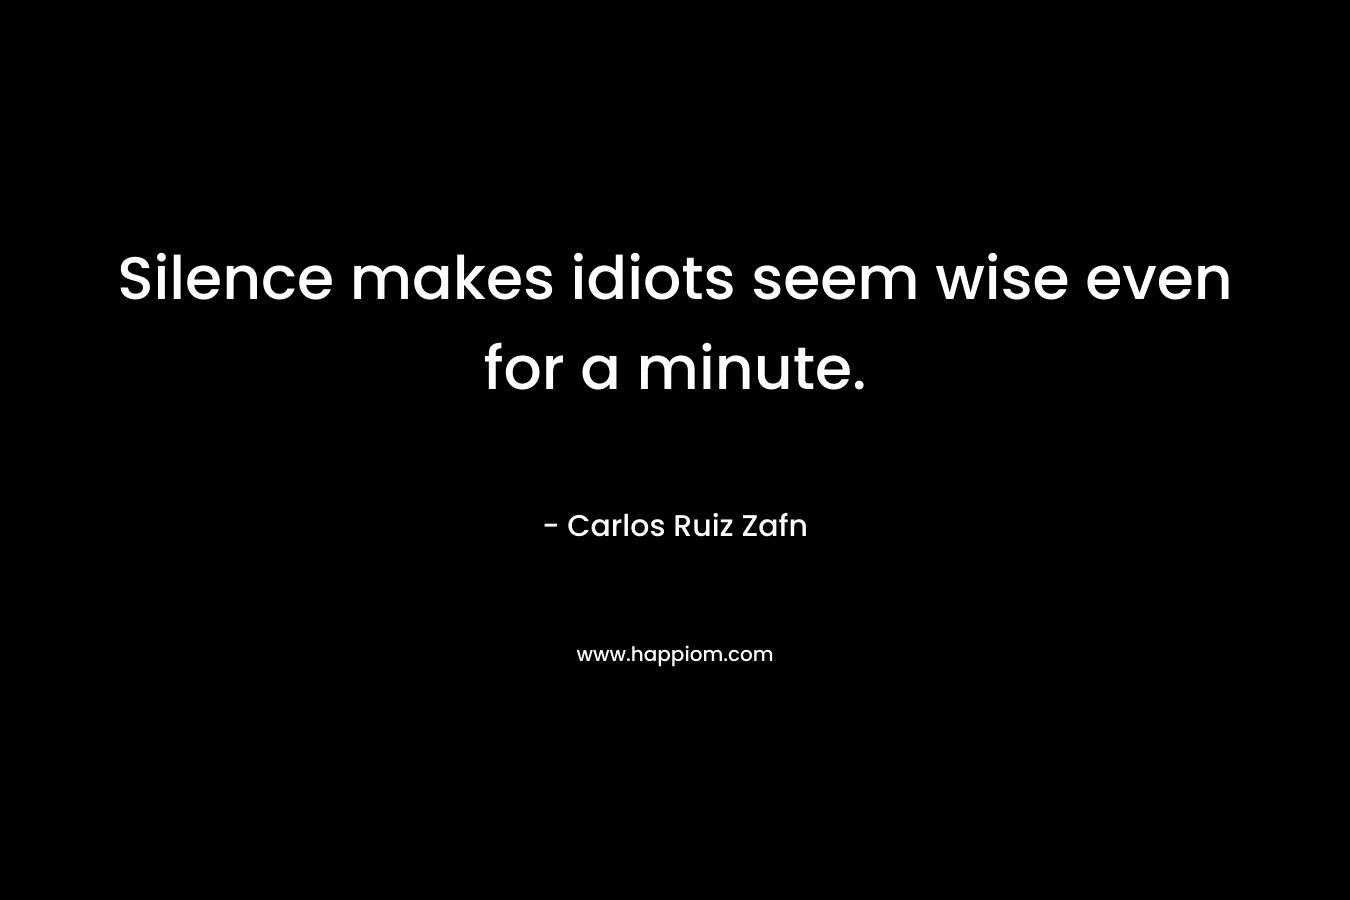 Silence makes idiots seem wise even for a minute.